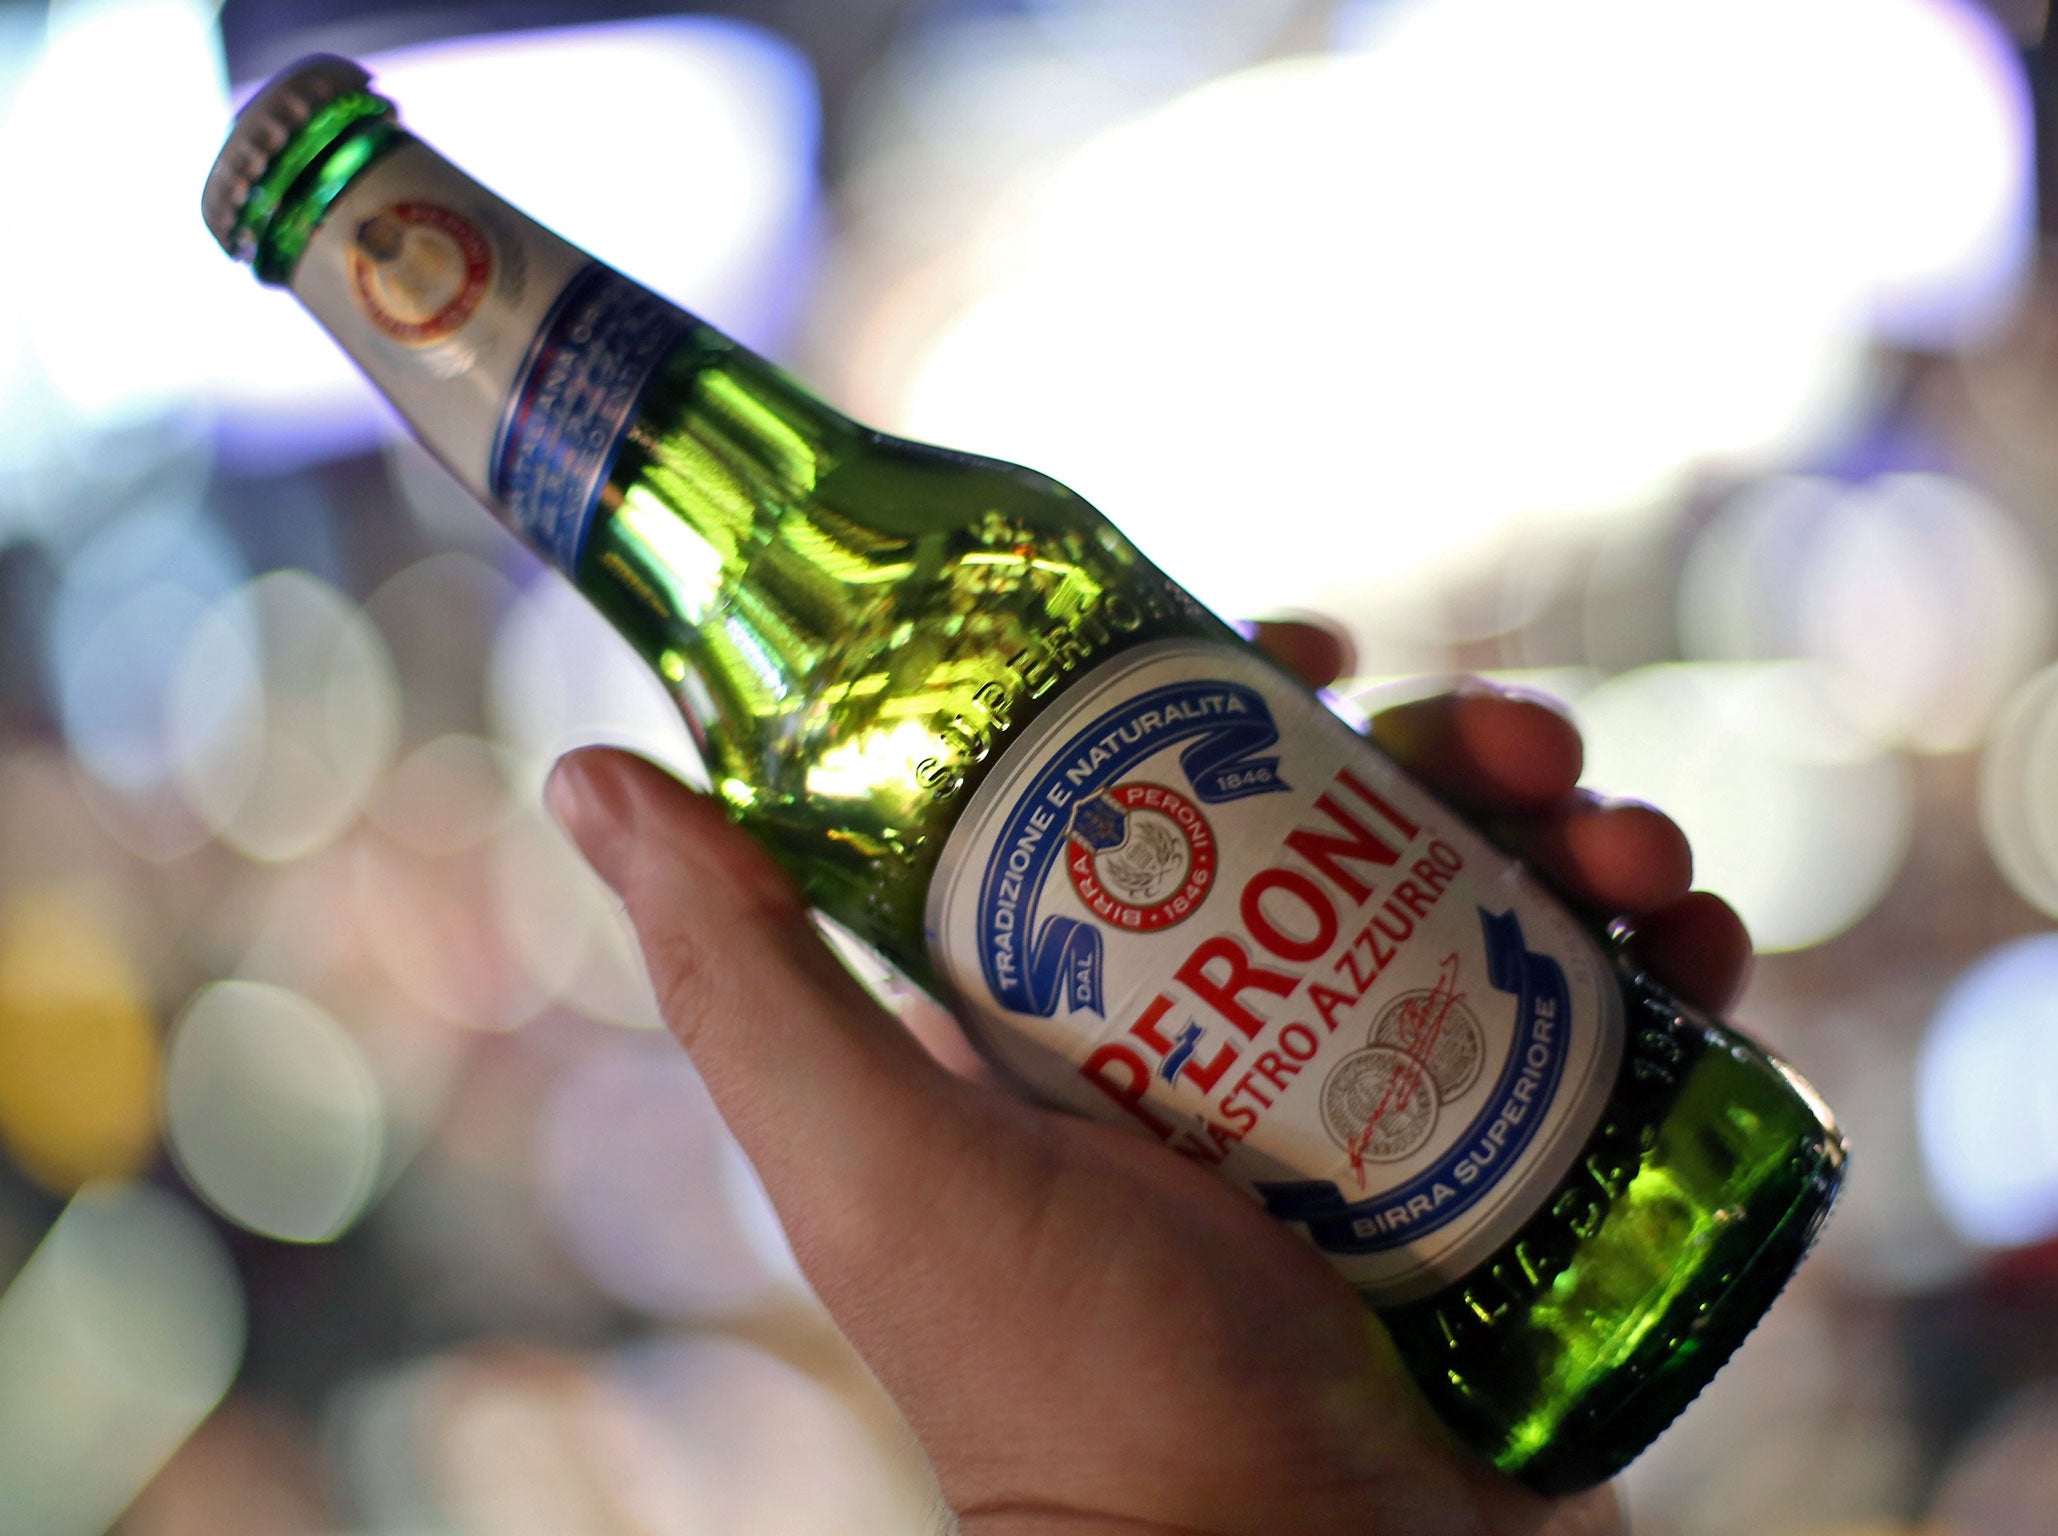 SABMiller, which brews Peroni, is the second largest brewer in the world, with 9.7% of global market share